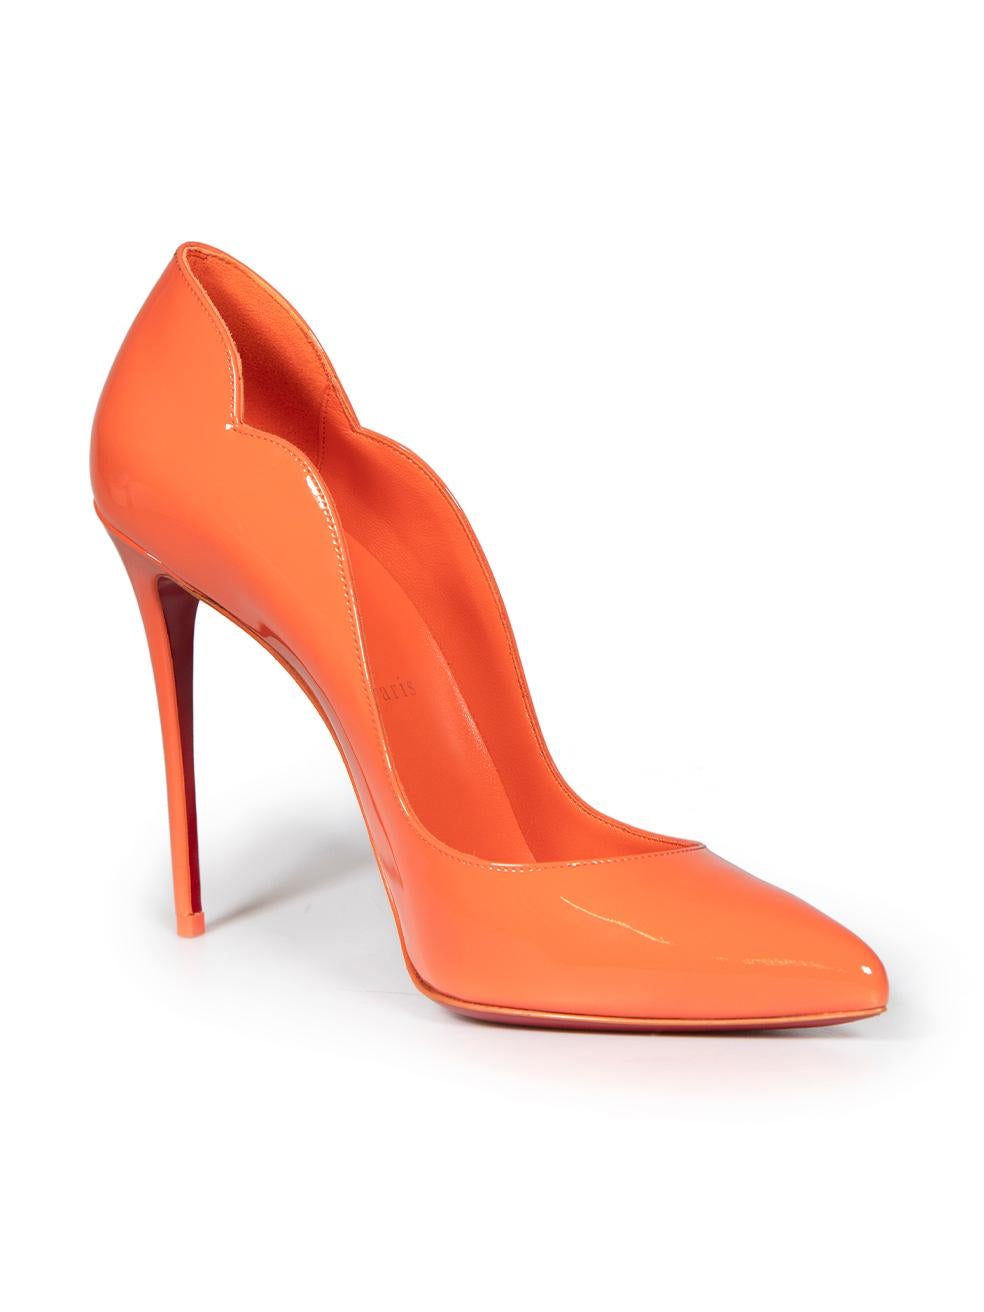 CONDITION is Very good. Hardly any visible wear to shoes is evident on this used Christian Louboutin designer resale item. These shoes come with original box and dust bag.
 
 
 
 Details
 
 
 Model: Hot Chick 100
 
 Orange
 
 Patent leather
 
